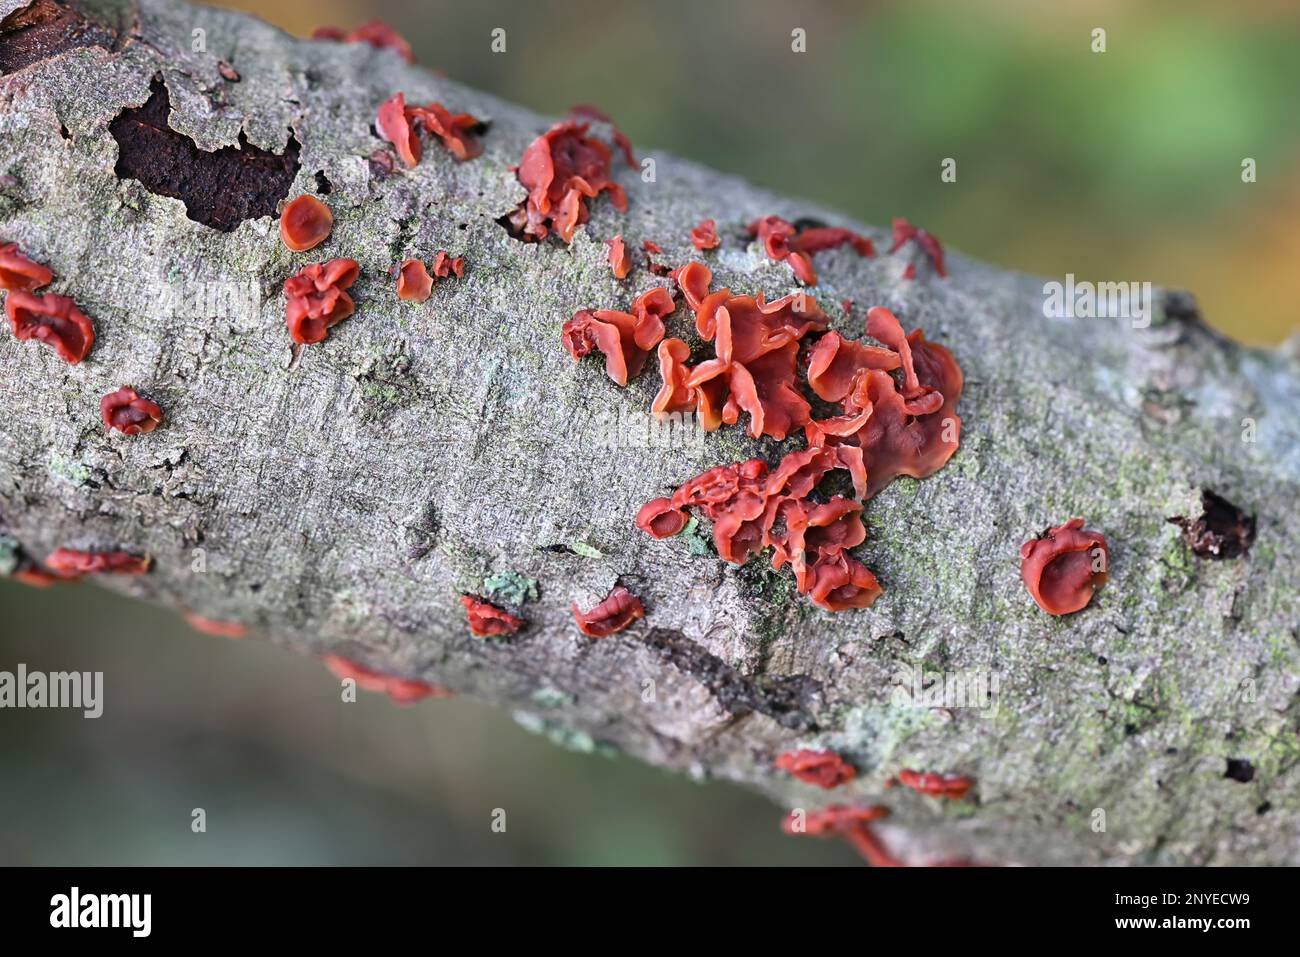 Cytidia salicina, commonly known as scarlet splash, wild fungus from Finland Stock Photo